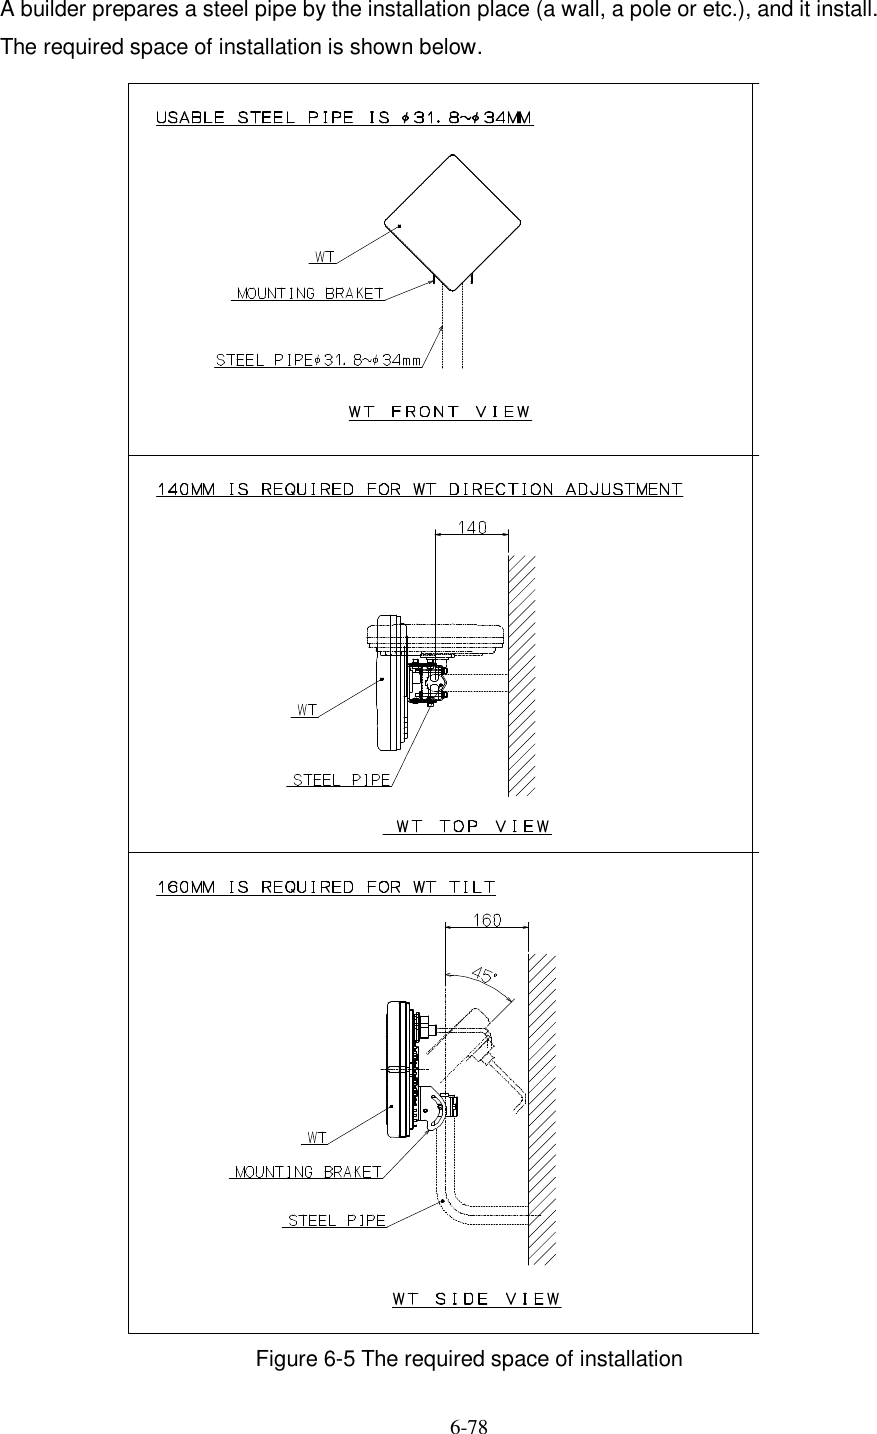   6-78   A builder prepares a steel pipe by the installation place (a wall, a pole or etc.), and it install.   The required space of installation is shown below.                                   Figure 6-5 The required space of installation 